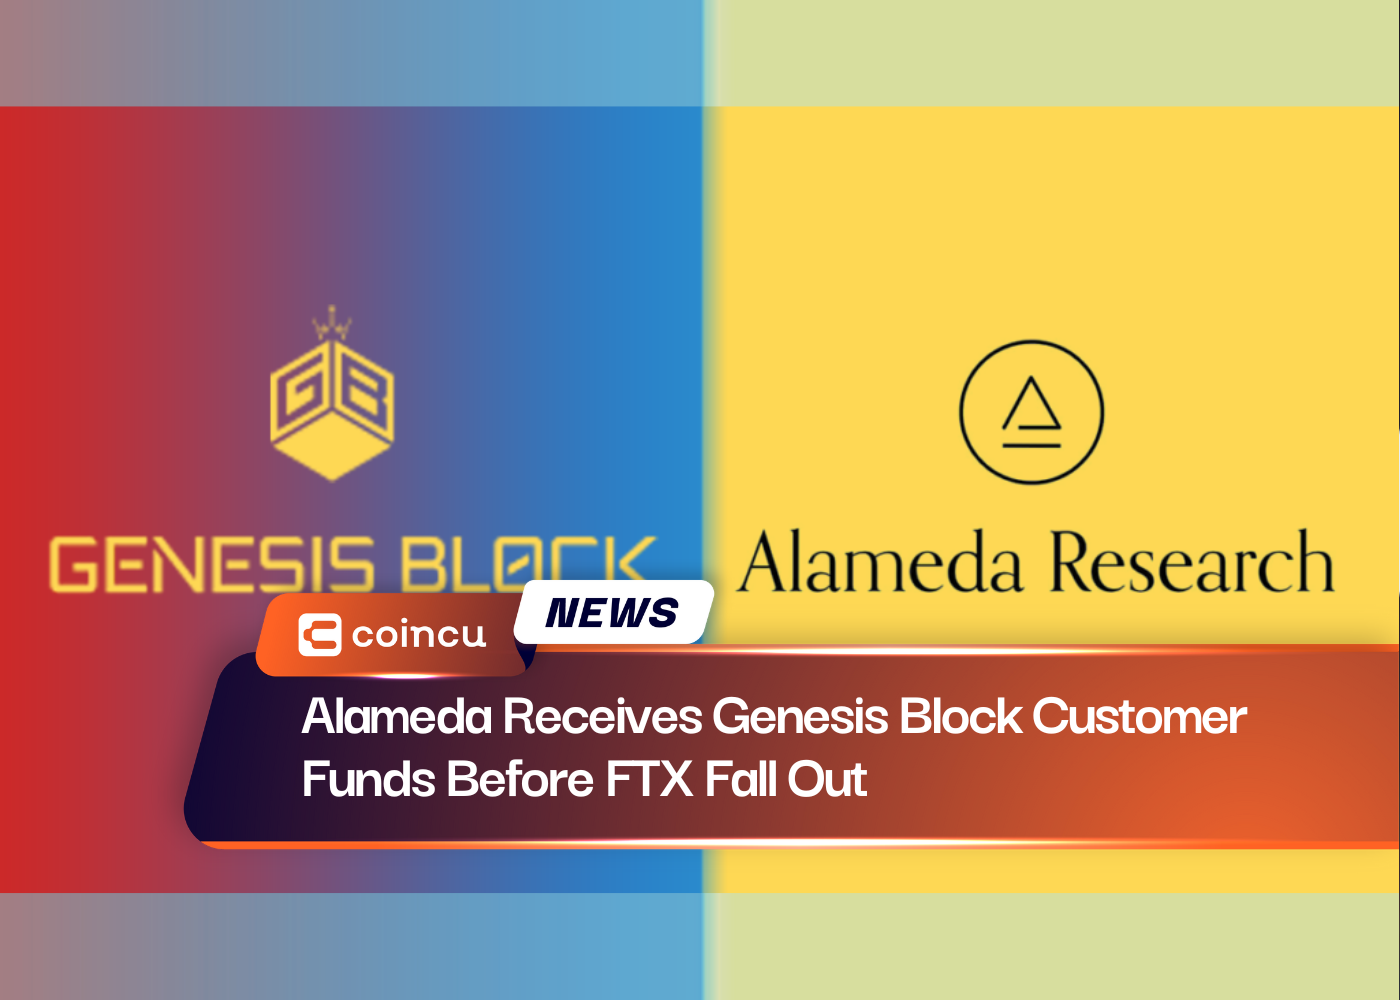 Alameda Receives Genesis Block Customer Funds Before FTX Fall Out